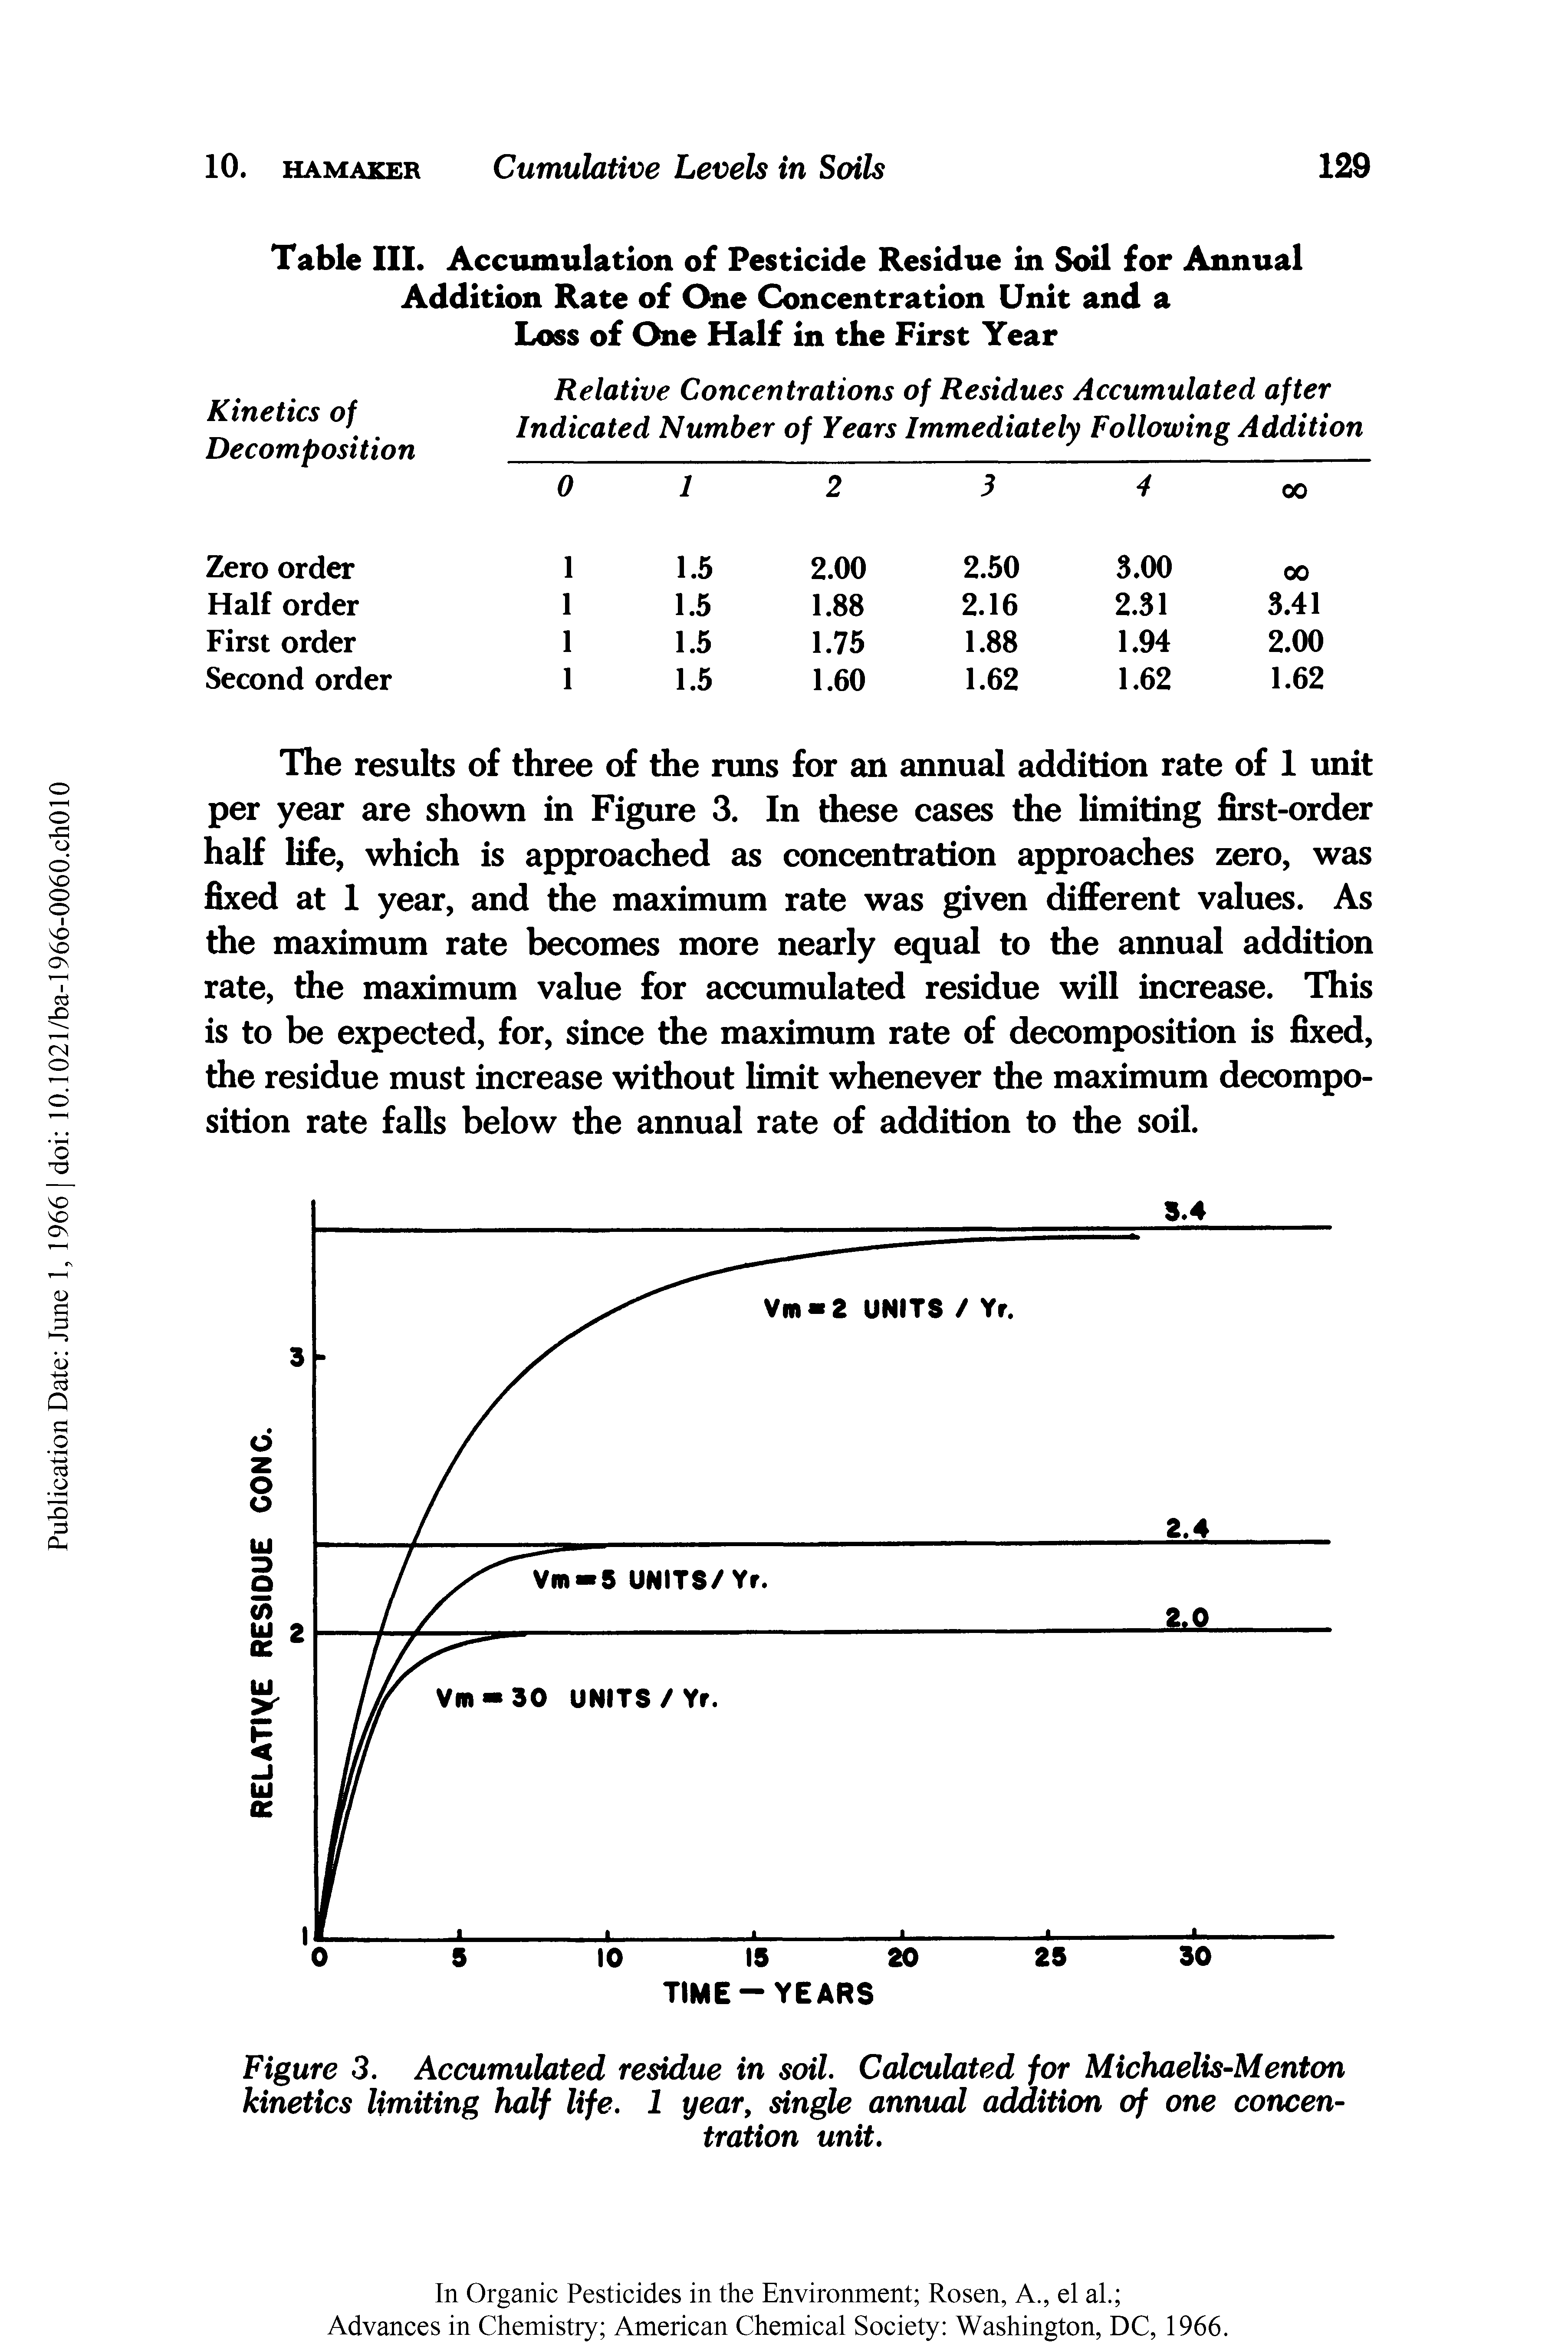 Figure 3. Accumulated residue in soil. Calculated for Michaelis-Menton kinetics limiting half life. 1 year, single annual addition of one concentration unit.